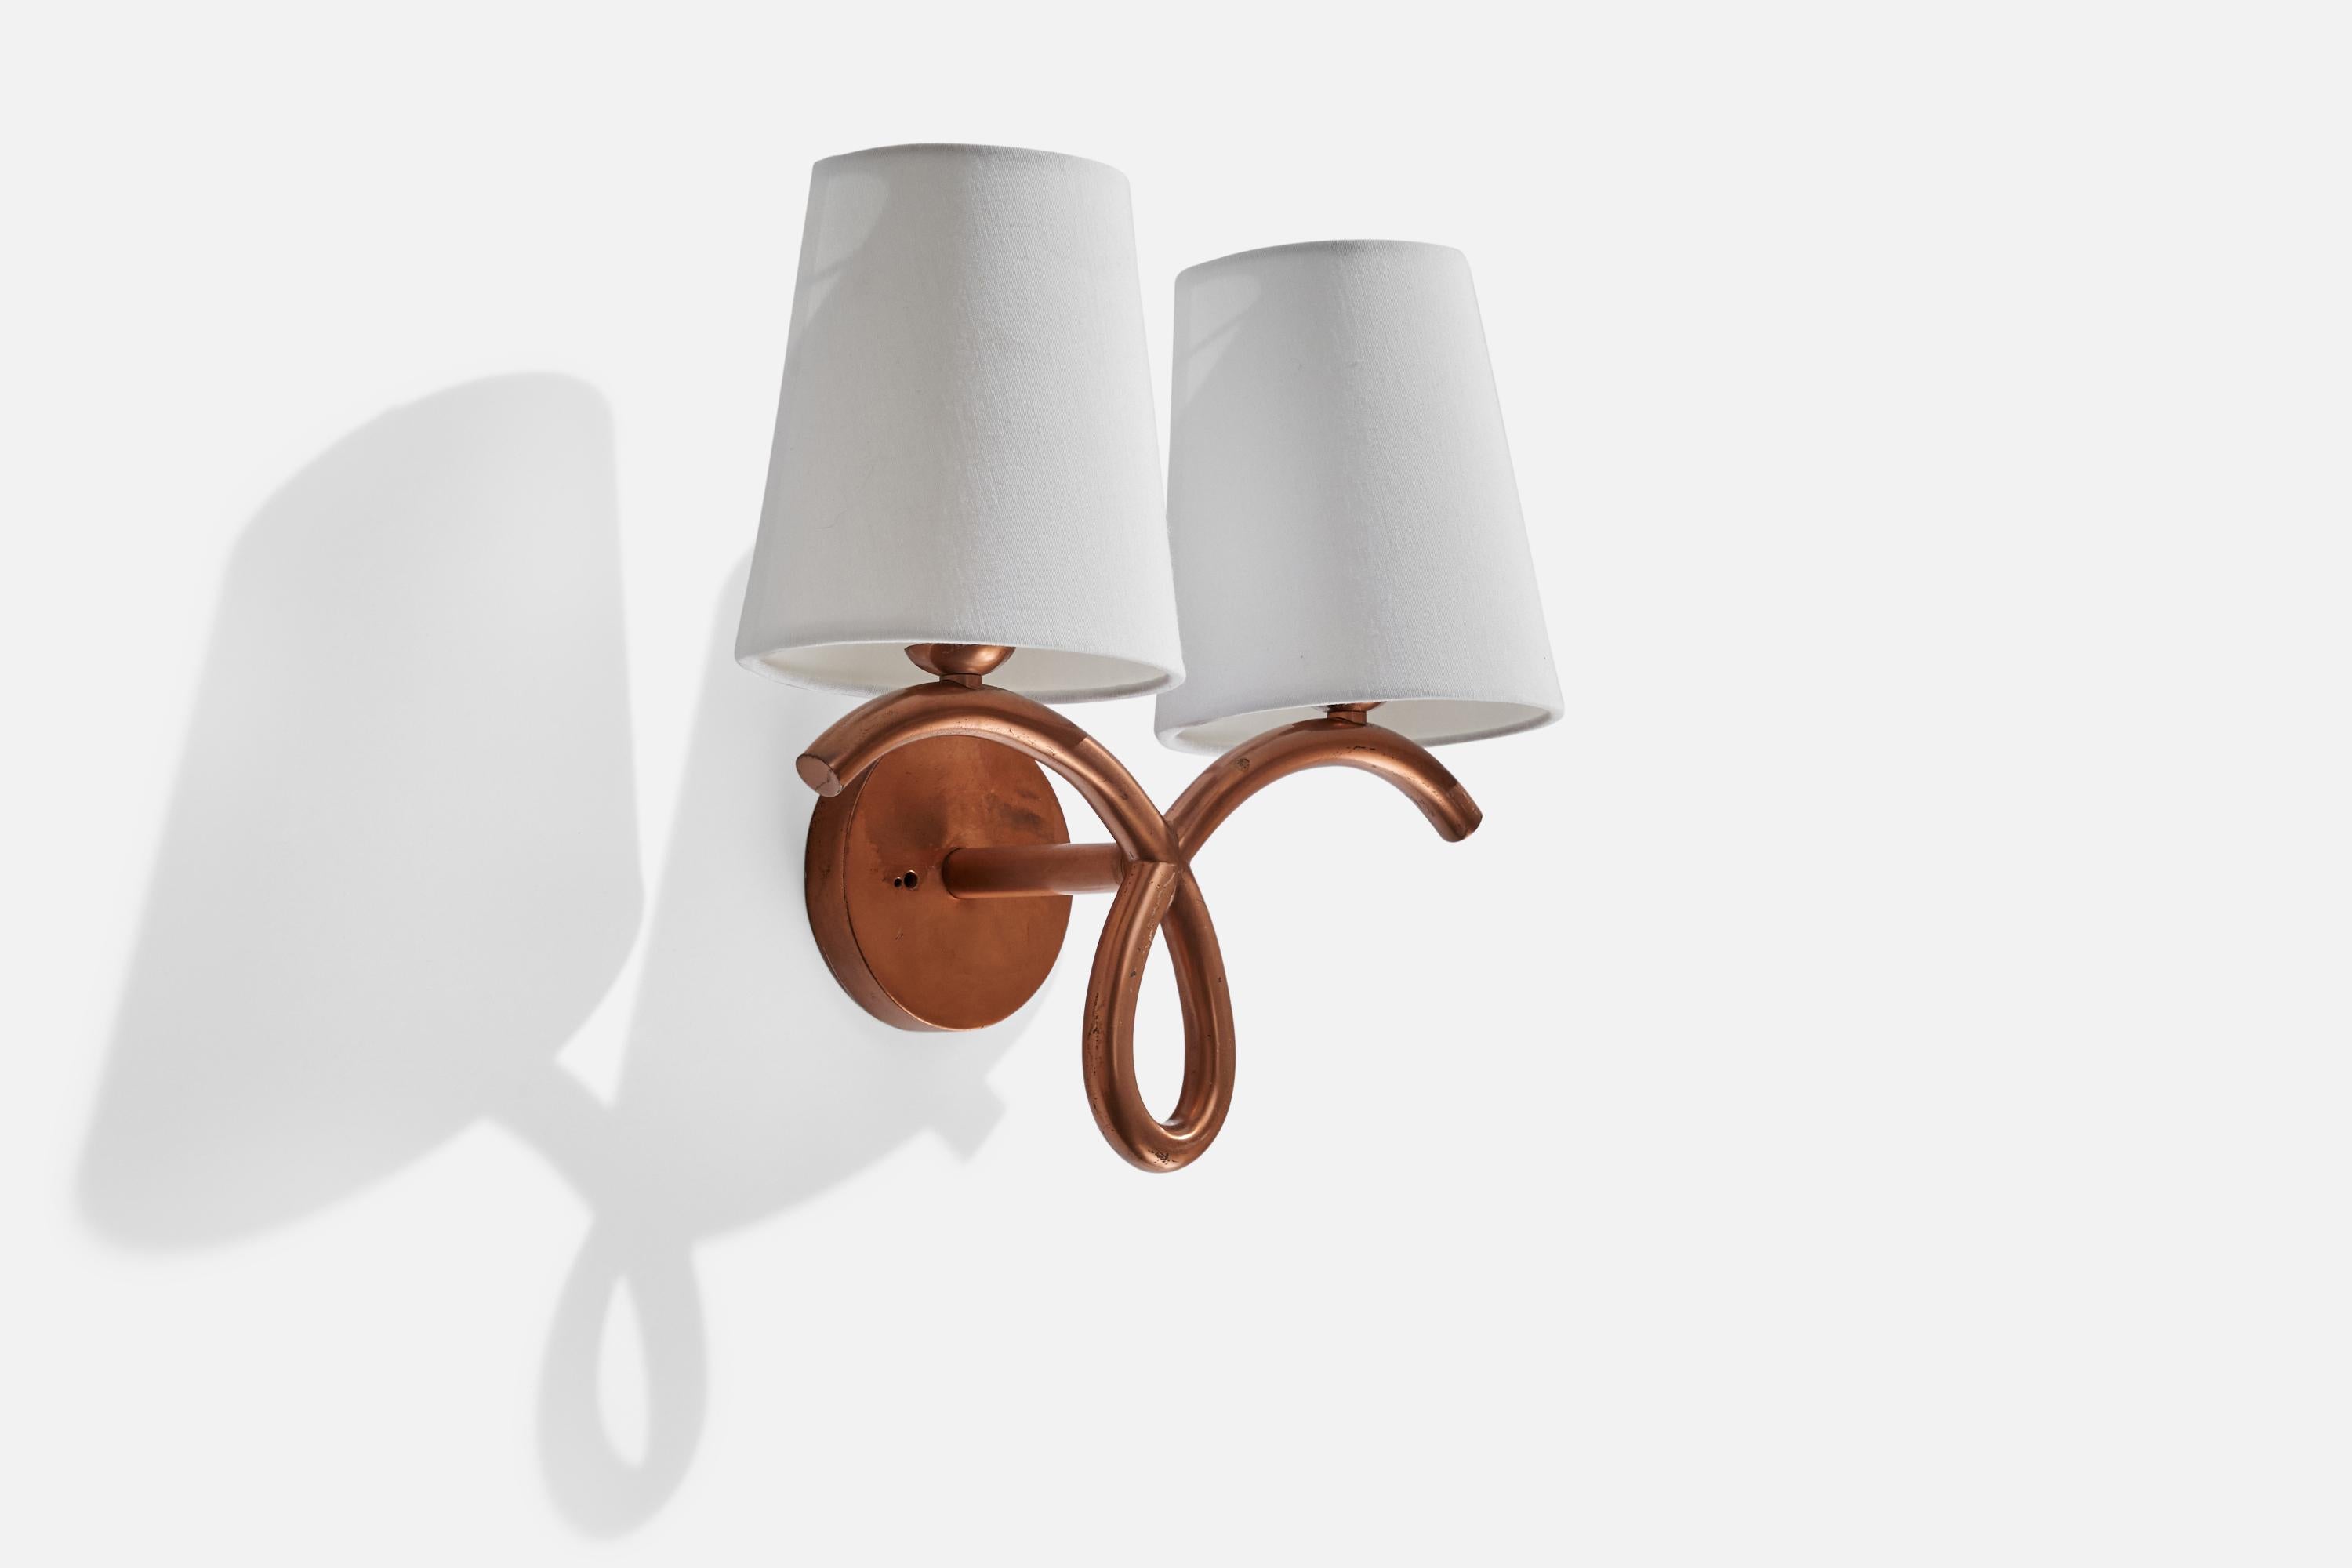 A copper and white fabric wall light designed and produced in Italy, c. 1940s.

Overall Dimensions (inches): 12” H x 13” W x 7” D
Back Plate Dimensions (inches): 4” H x 4” W x .75”D
Bulb Specifications: E-14 Bulb
Number of Sockets: 2
All lighting